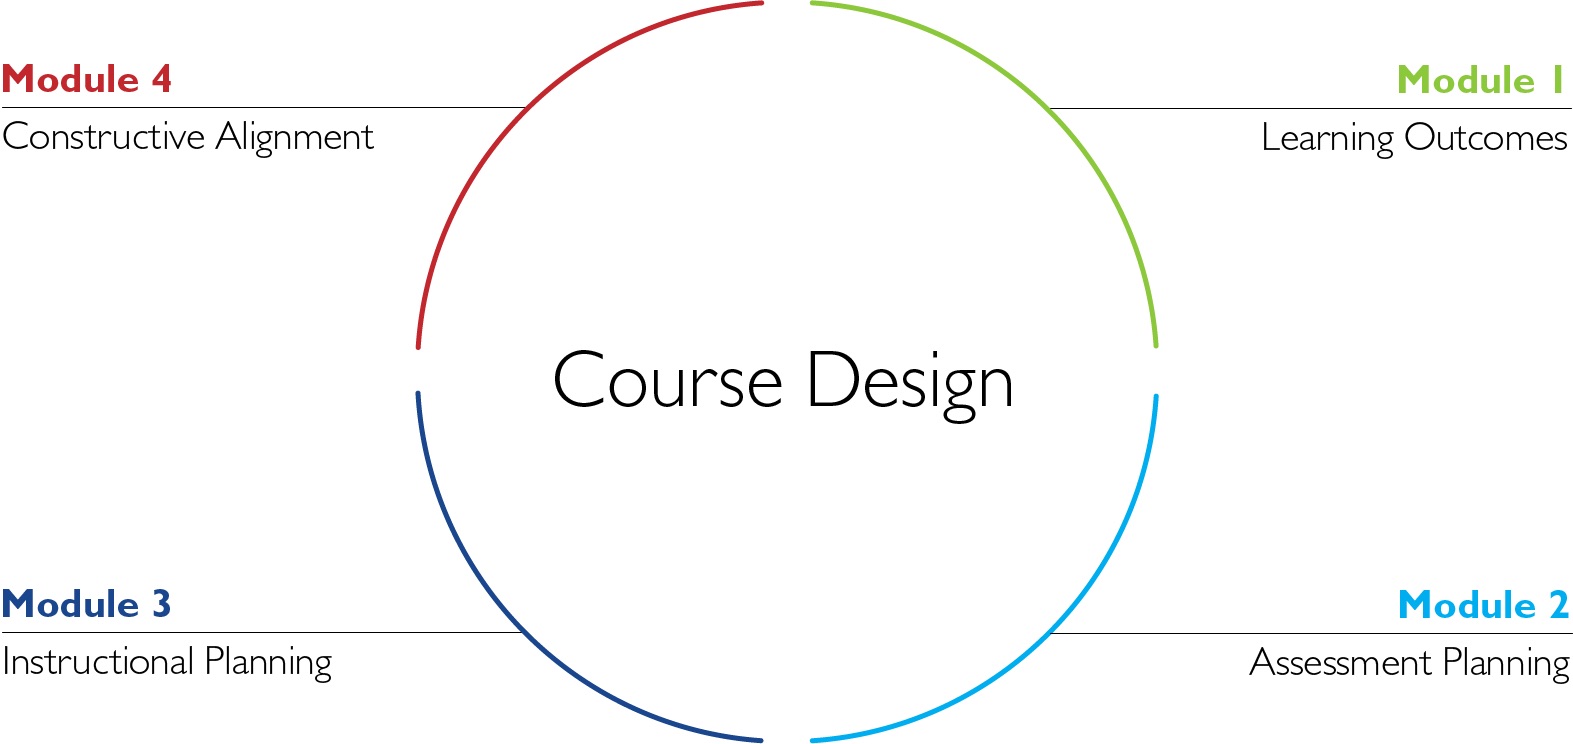 Course Design is composed by 4 modules: Learning Outcomes, Assessment Planning, Instructional Planning, Constructive Alignment